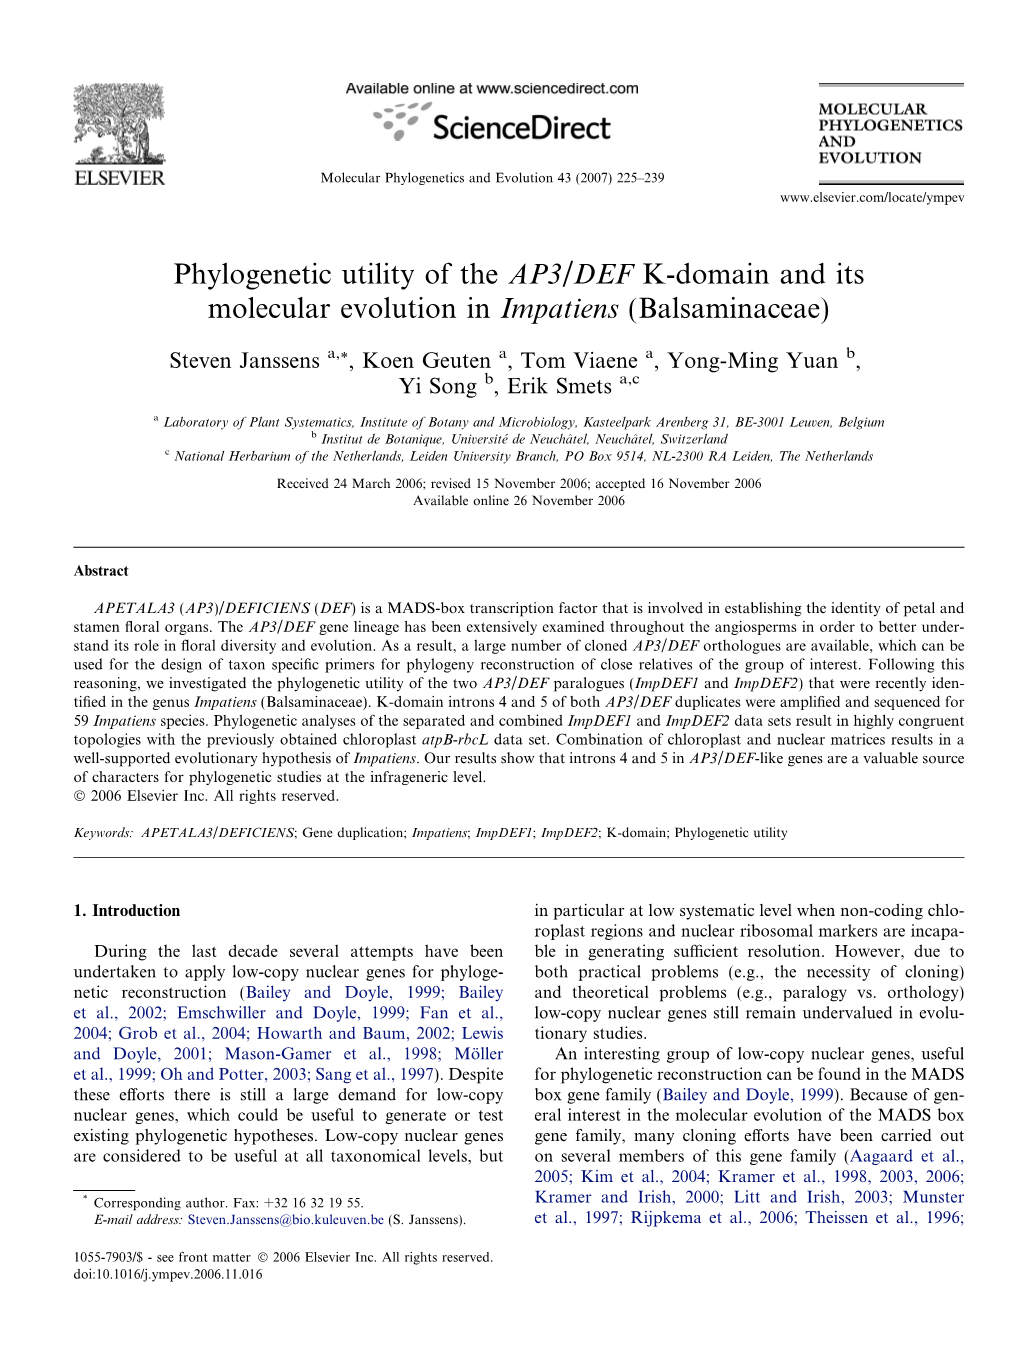 Phylogenetic Utility of the AP3/DEF K-Domain and Its Molecular Evolution in Impatiens (Balsaminaceae)